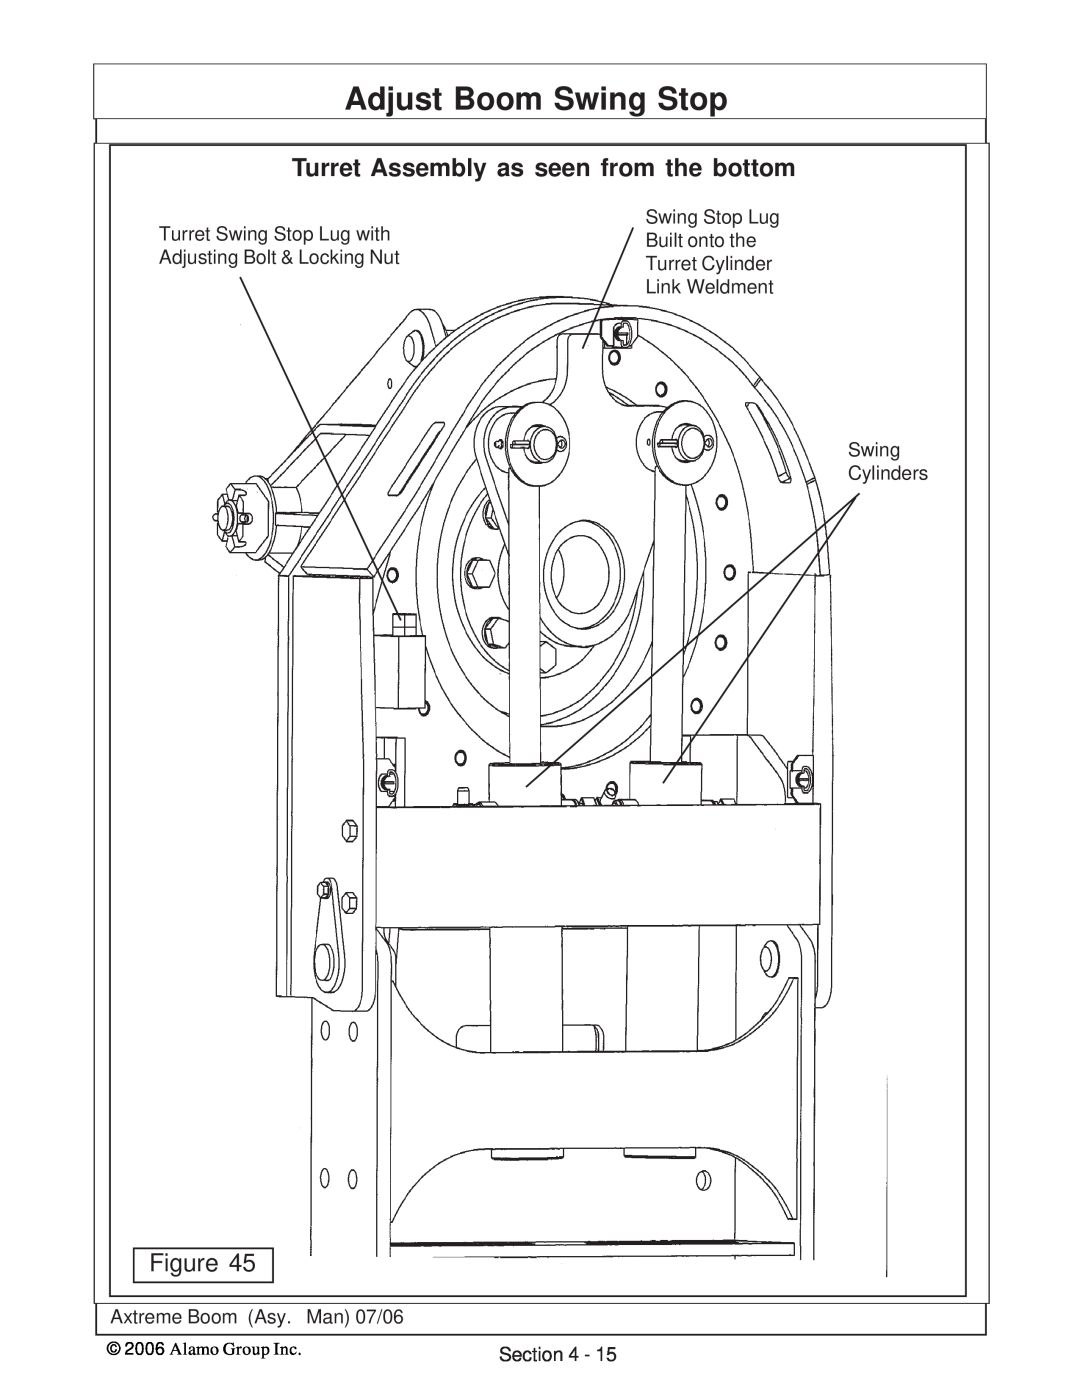 Alamo 02984405 instruction manual Turret Assembly as seen from the bottom, Adjust Boom Swing Stop 